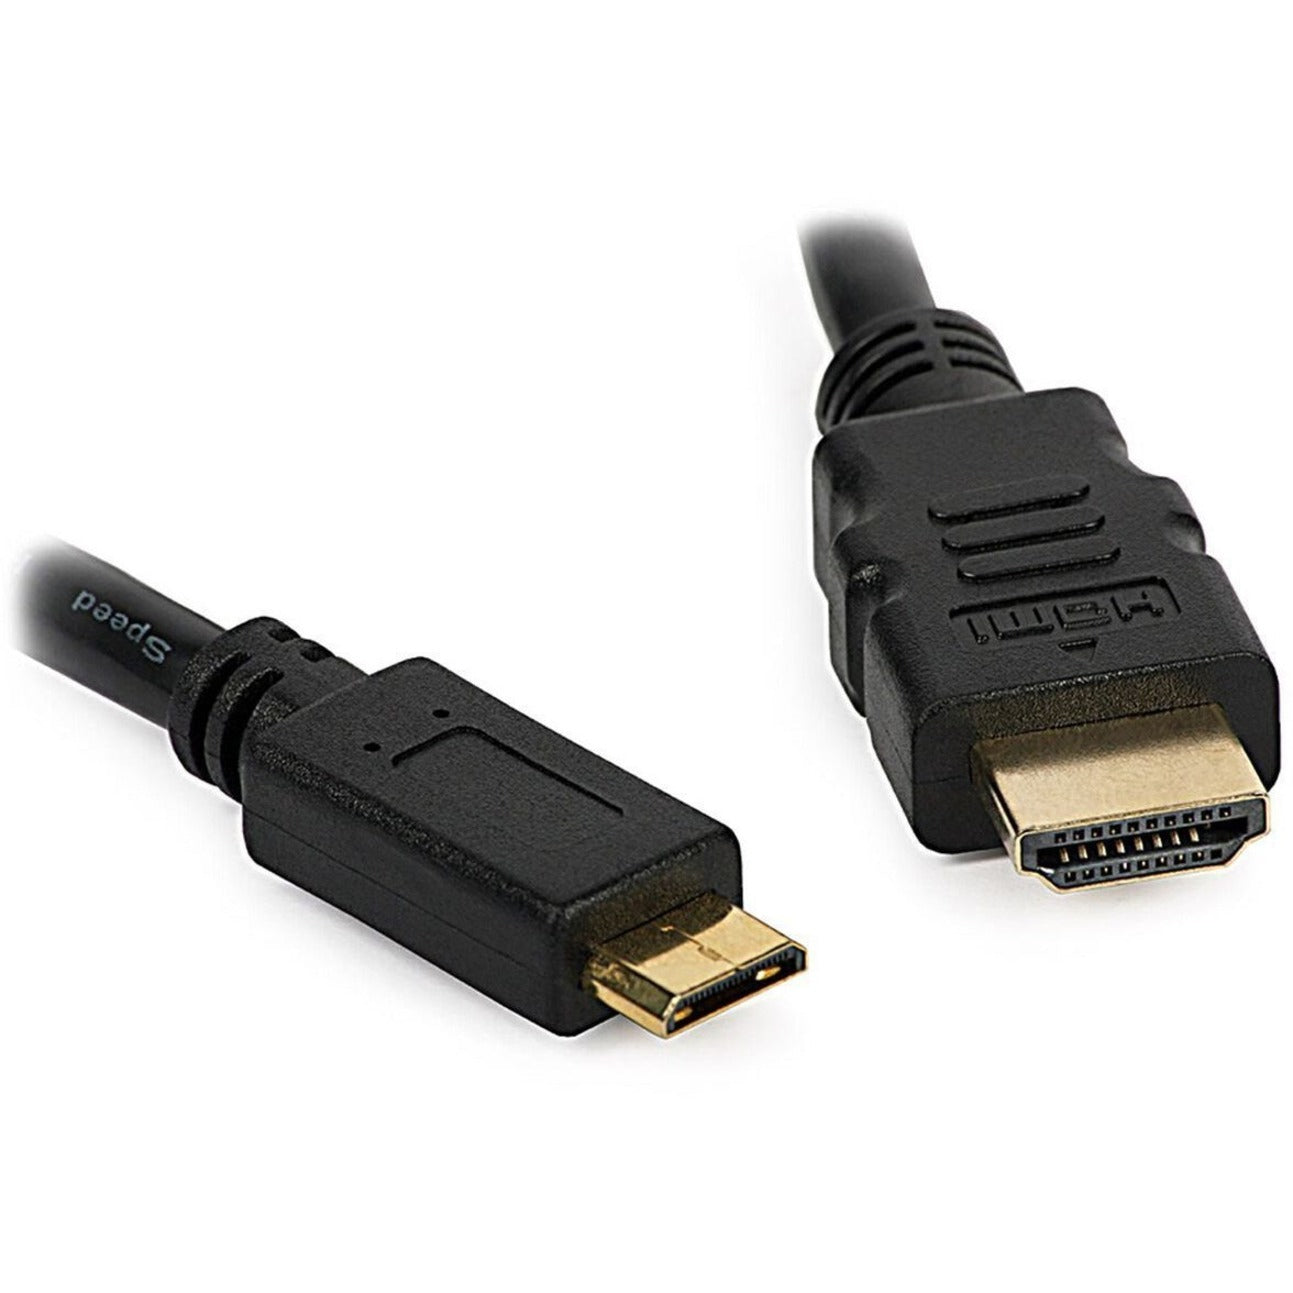 4XEM 4XHDMIMINI15FT 15FT Mini HDMI To HDMI M/M Adapter Cable, 10.2 Gbit/s Data Transfer Rate, Gold Plated Connectors